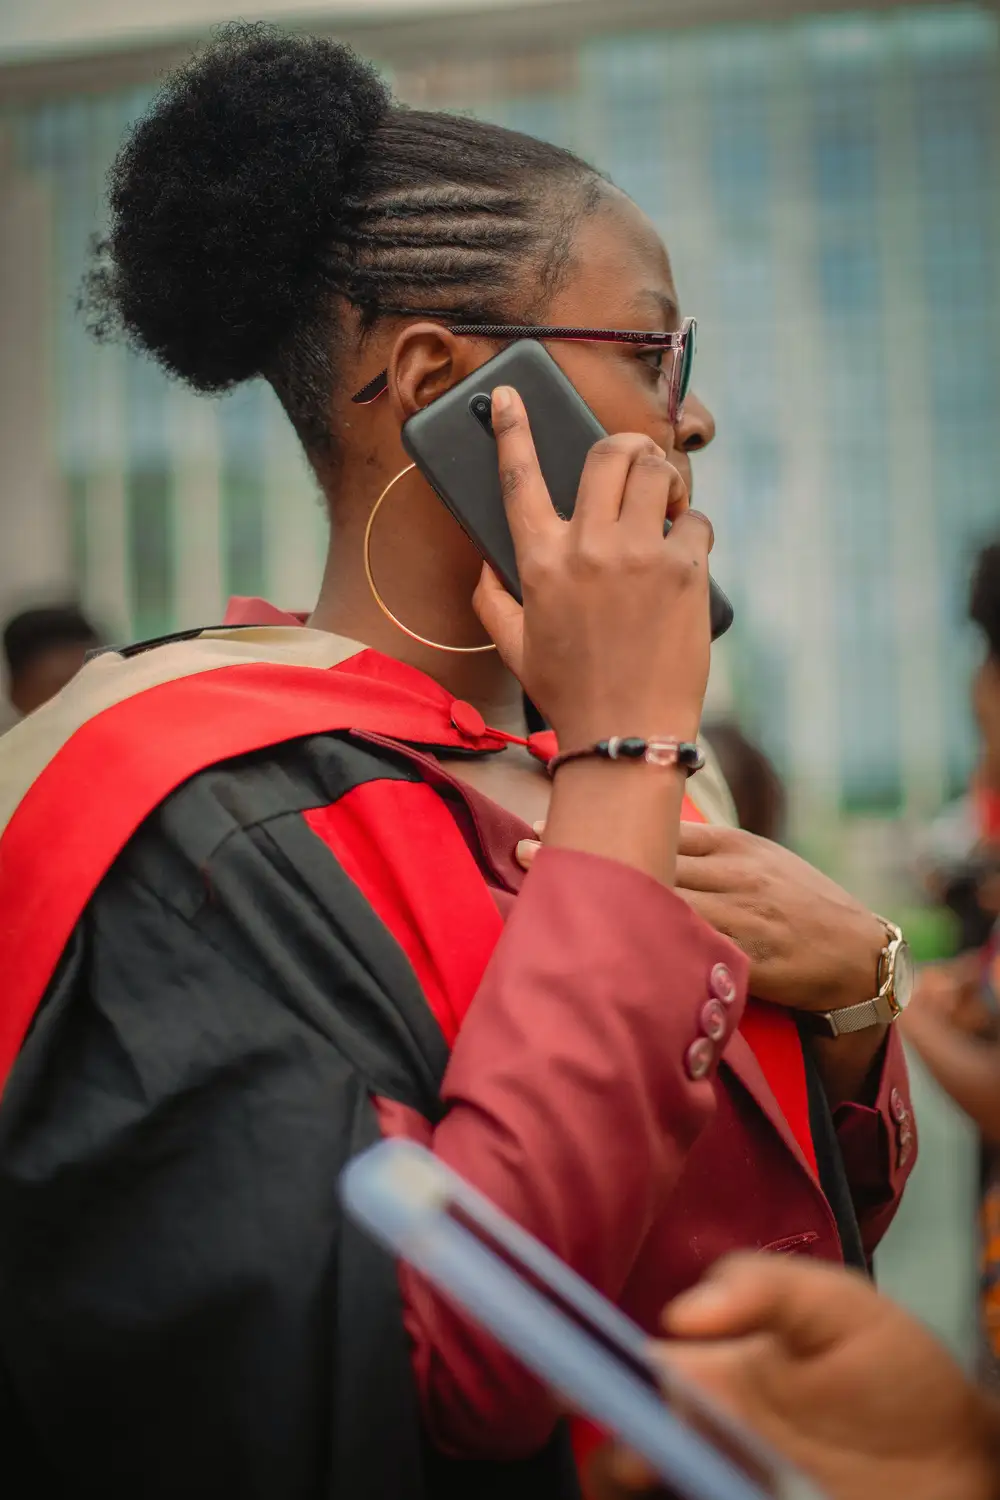 woman in a graduation gown making a phone call